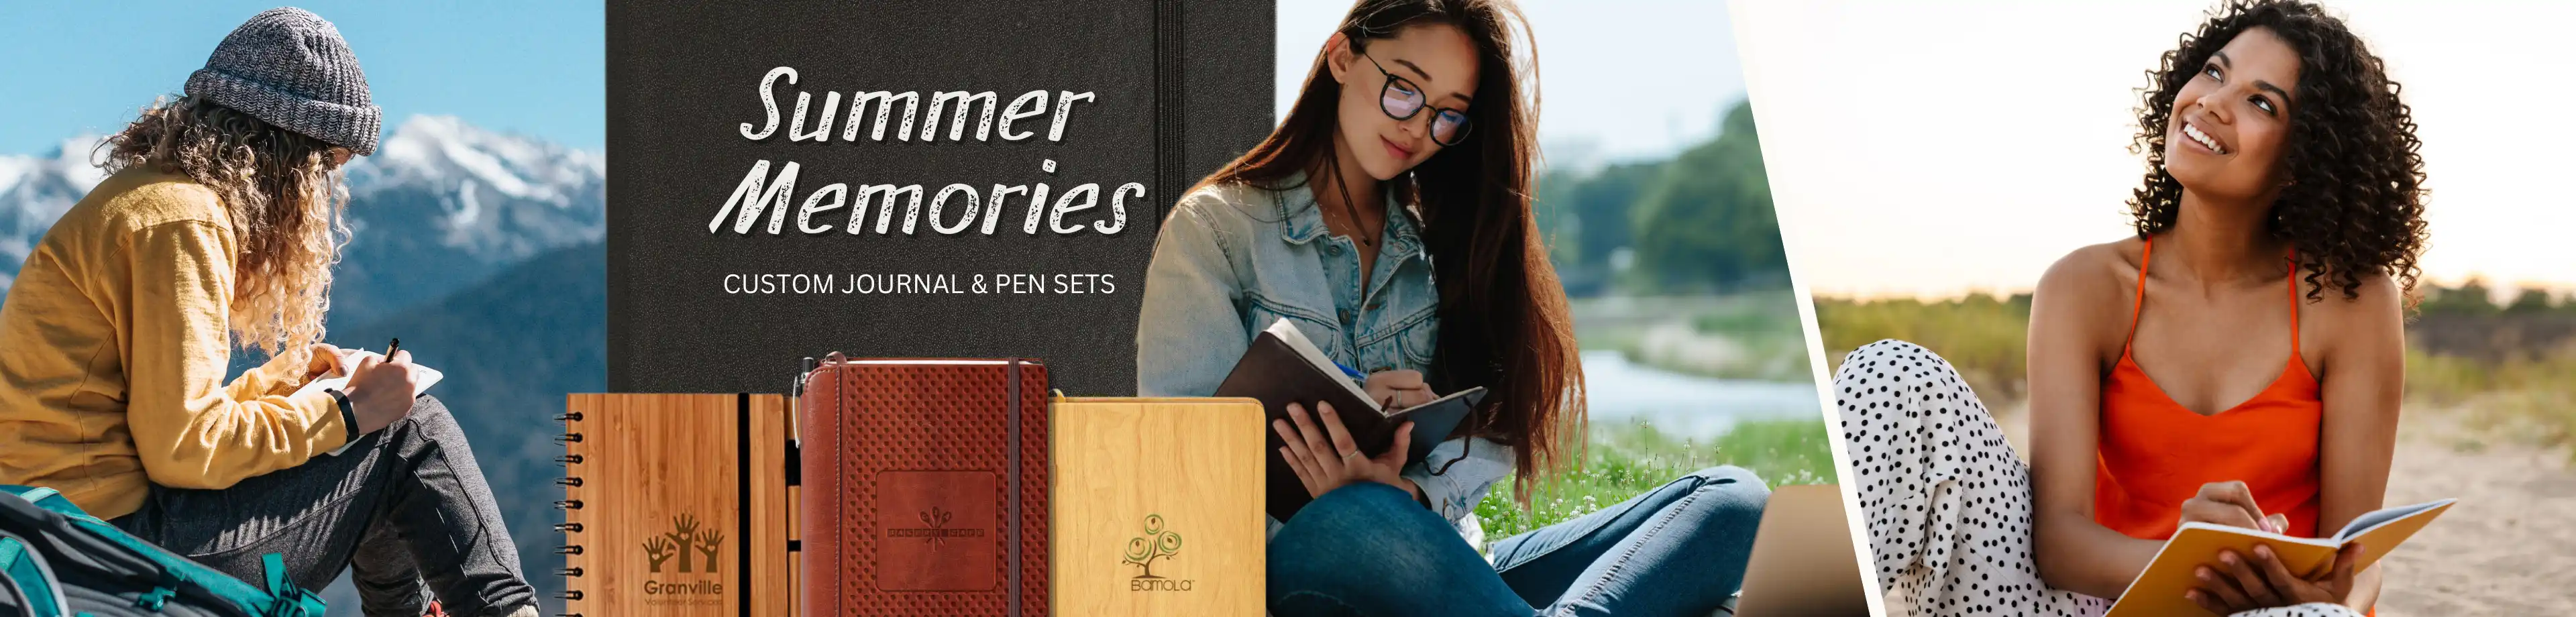 Custom Journal & Pen Sets branded with your logo - Versatile and practical business gifts this season!